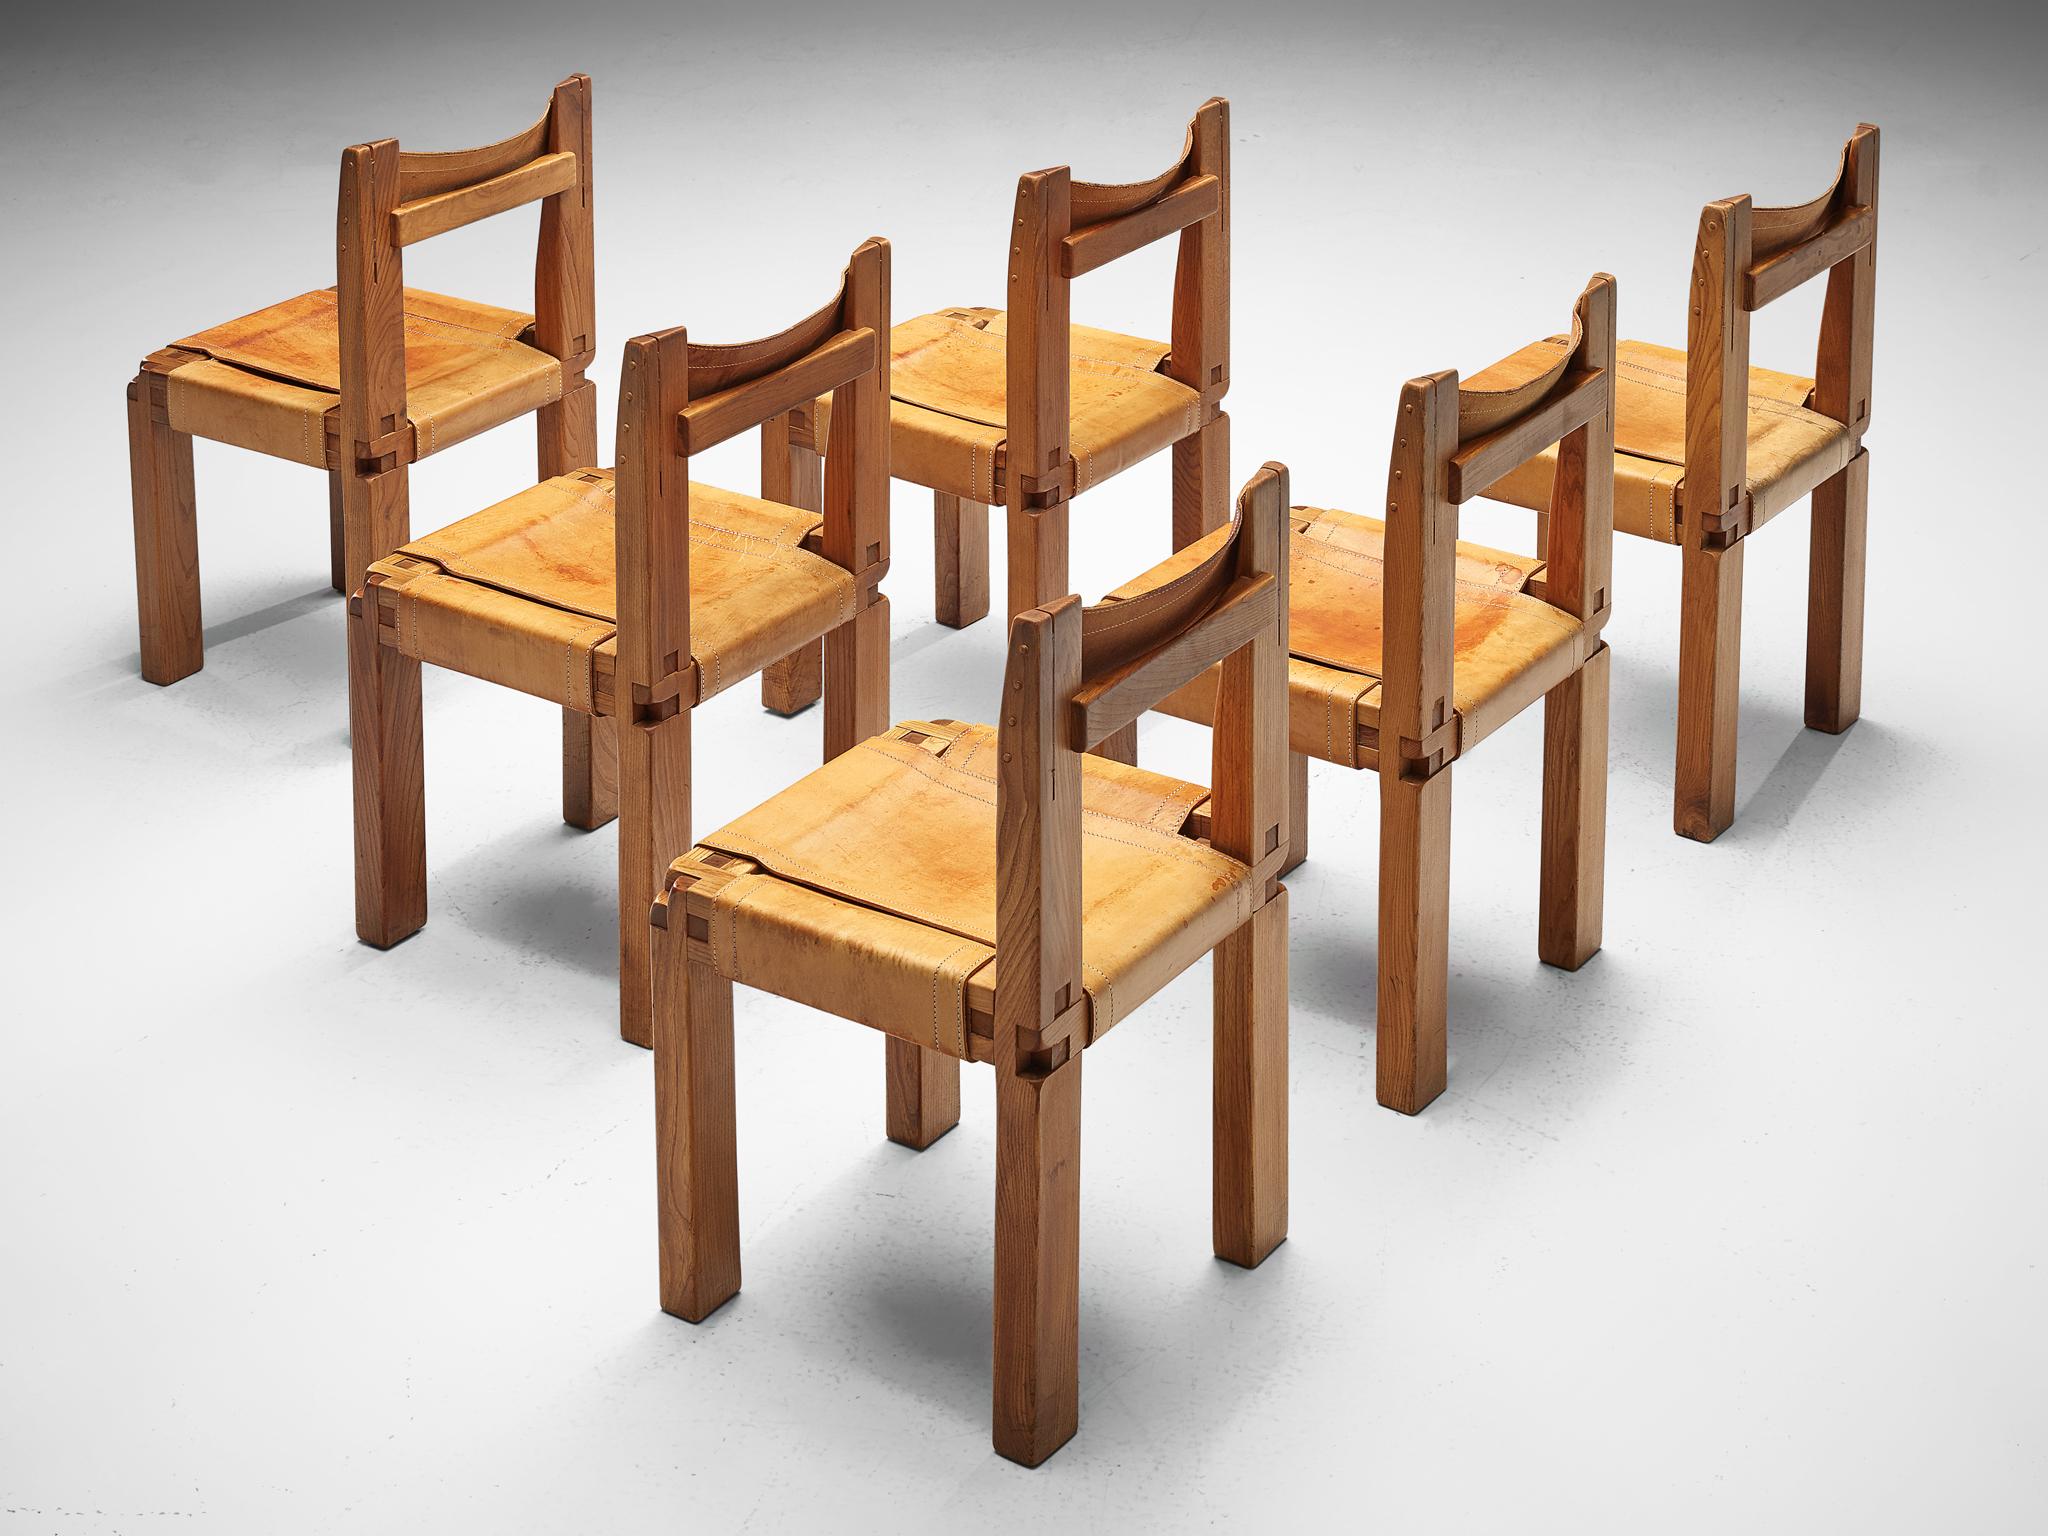 Pierre Chapo, set of six dining chairs, model S11, elm and leather, France, circa 1966. 

A set of six chairs in solid elmwood with black saddle leather seating and back, designed by French designer Pierre Chapo. These chairs have a cubic design